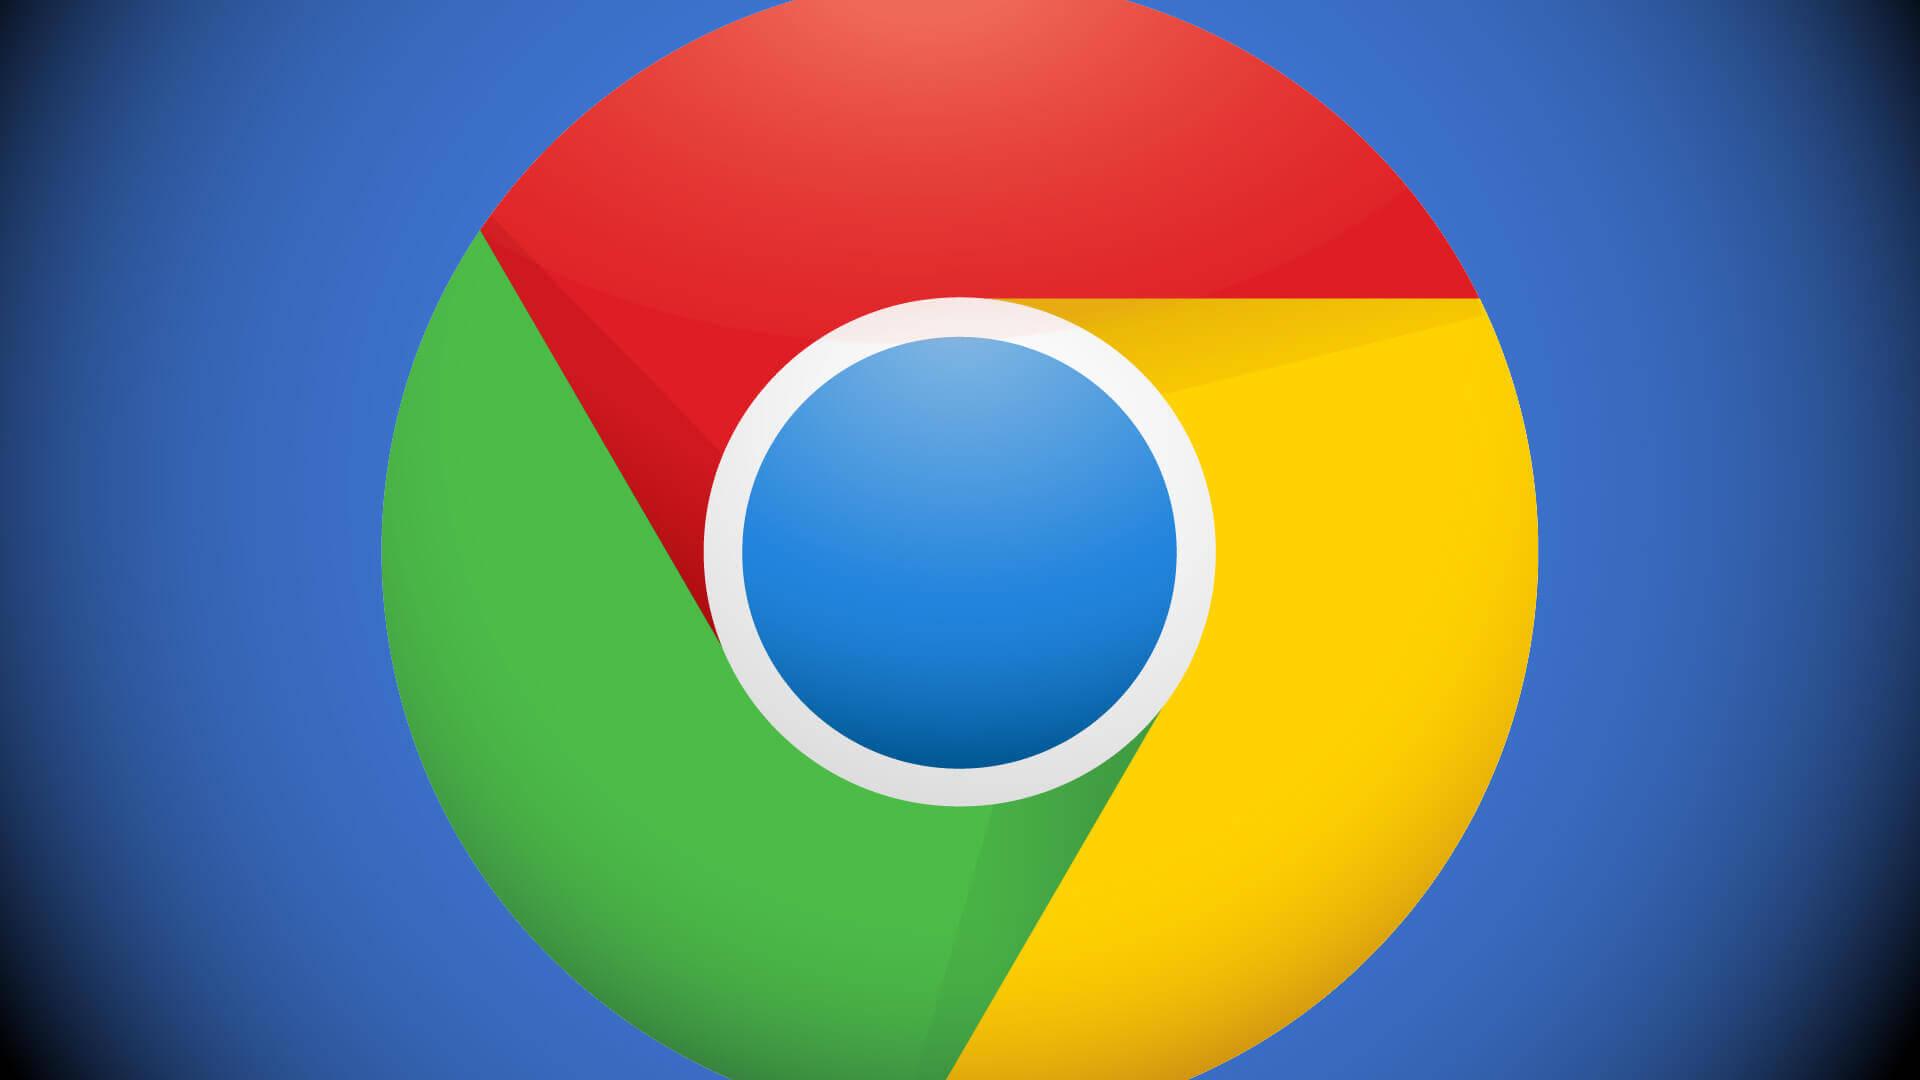 Chrome Browser Logo - Google now allows its Chrome browser to remove all ads from 'abusive